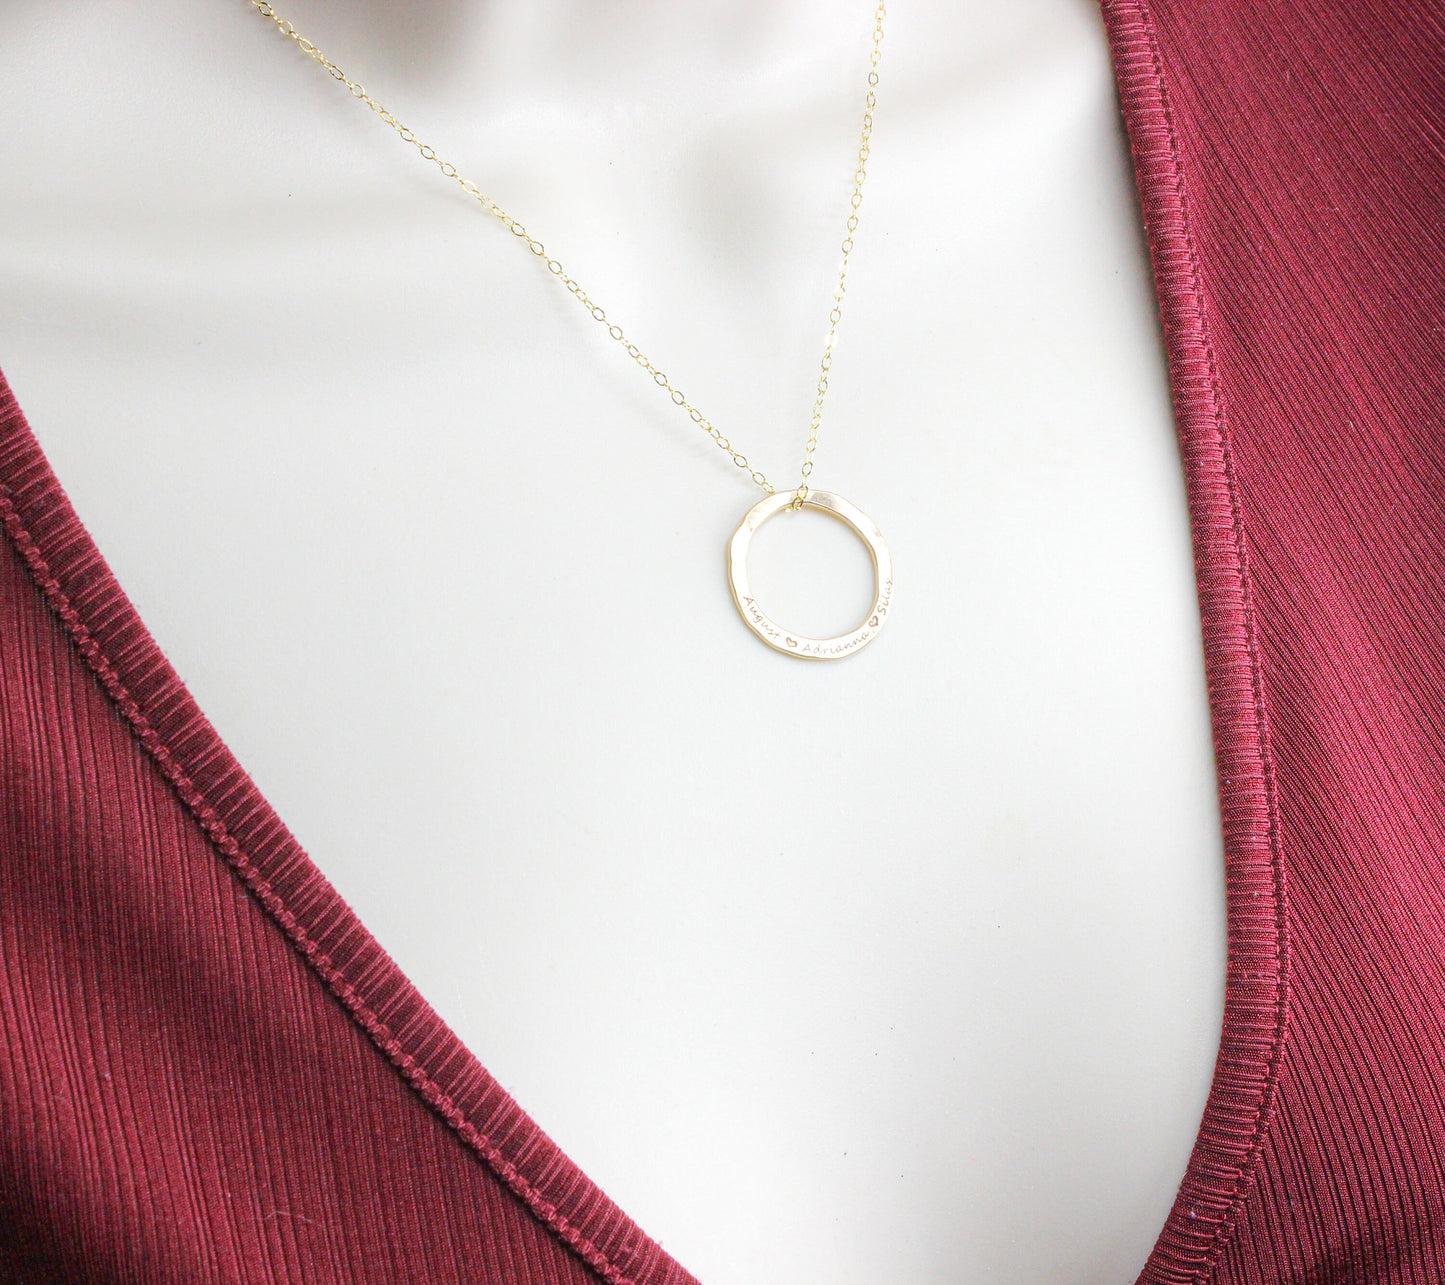 14k Gold Filled Hammered Circle Name Necklace | Custom Engraved Pendant | Handmade Personalized Jewelry